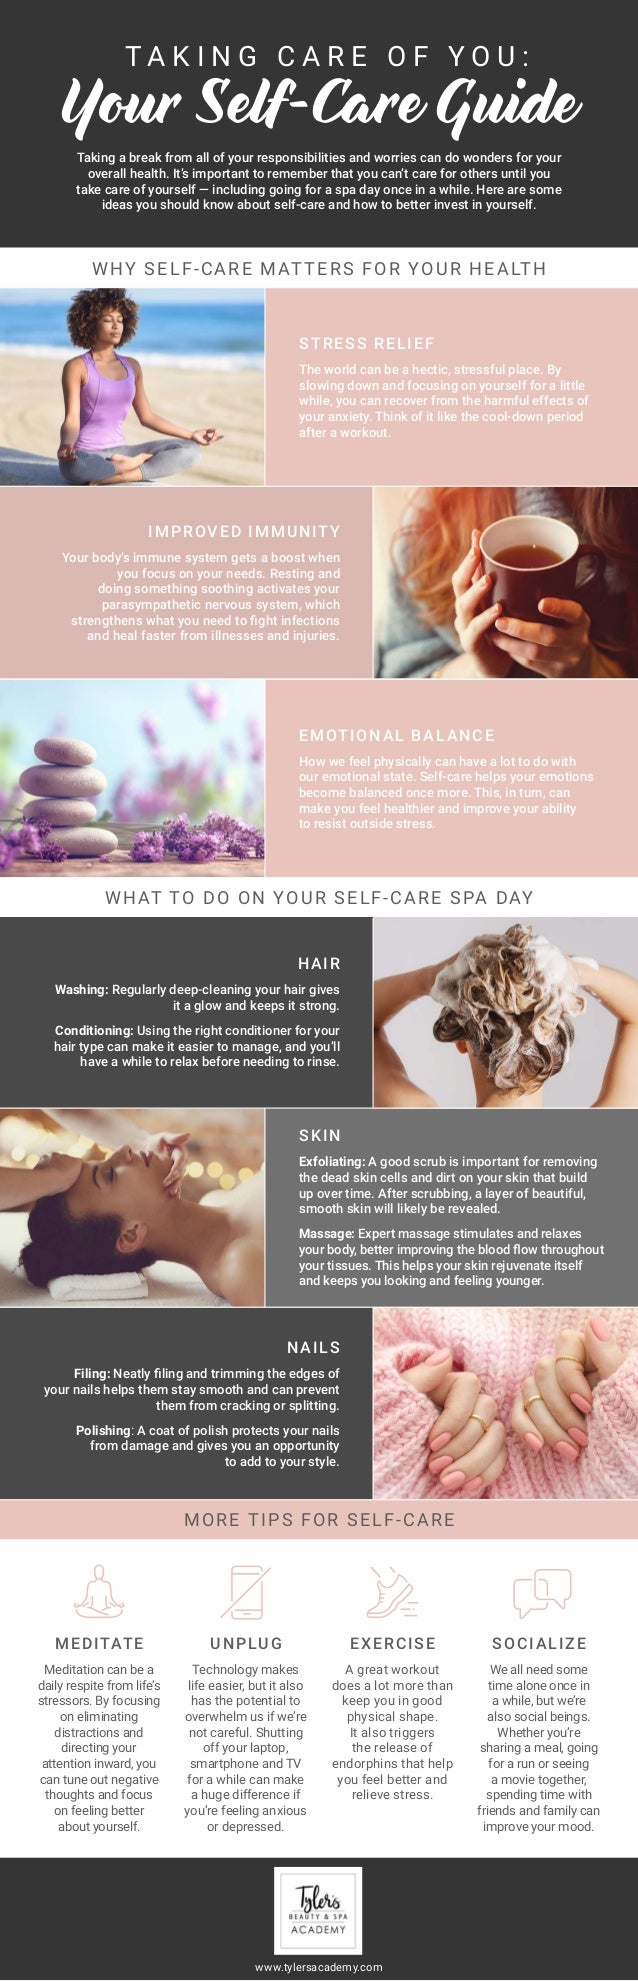 Taking Care Of You: Your Self-Care Guide